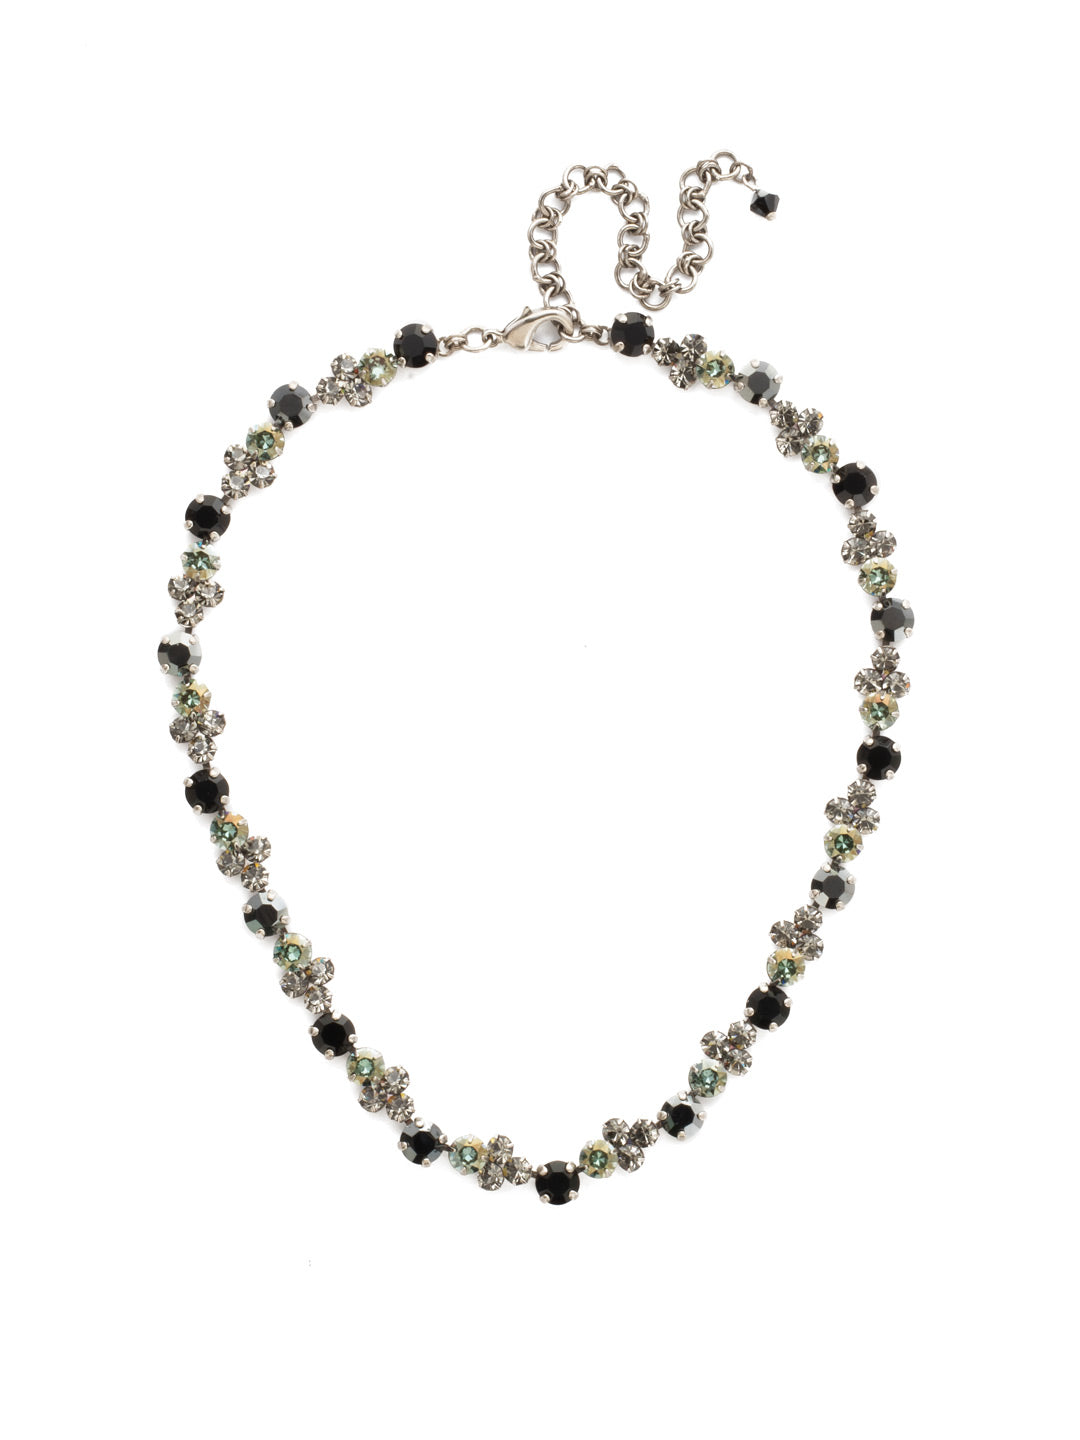 Wisteria Tennis Necklace - NDQ36ASBON - Round and round we go with a linear pattern of circular crystals. From Sorrelli's Black Onyx collection in our Antique Silver-tone finish.